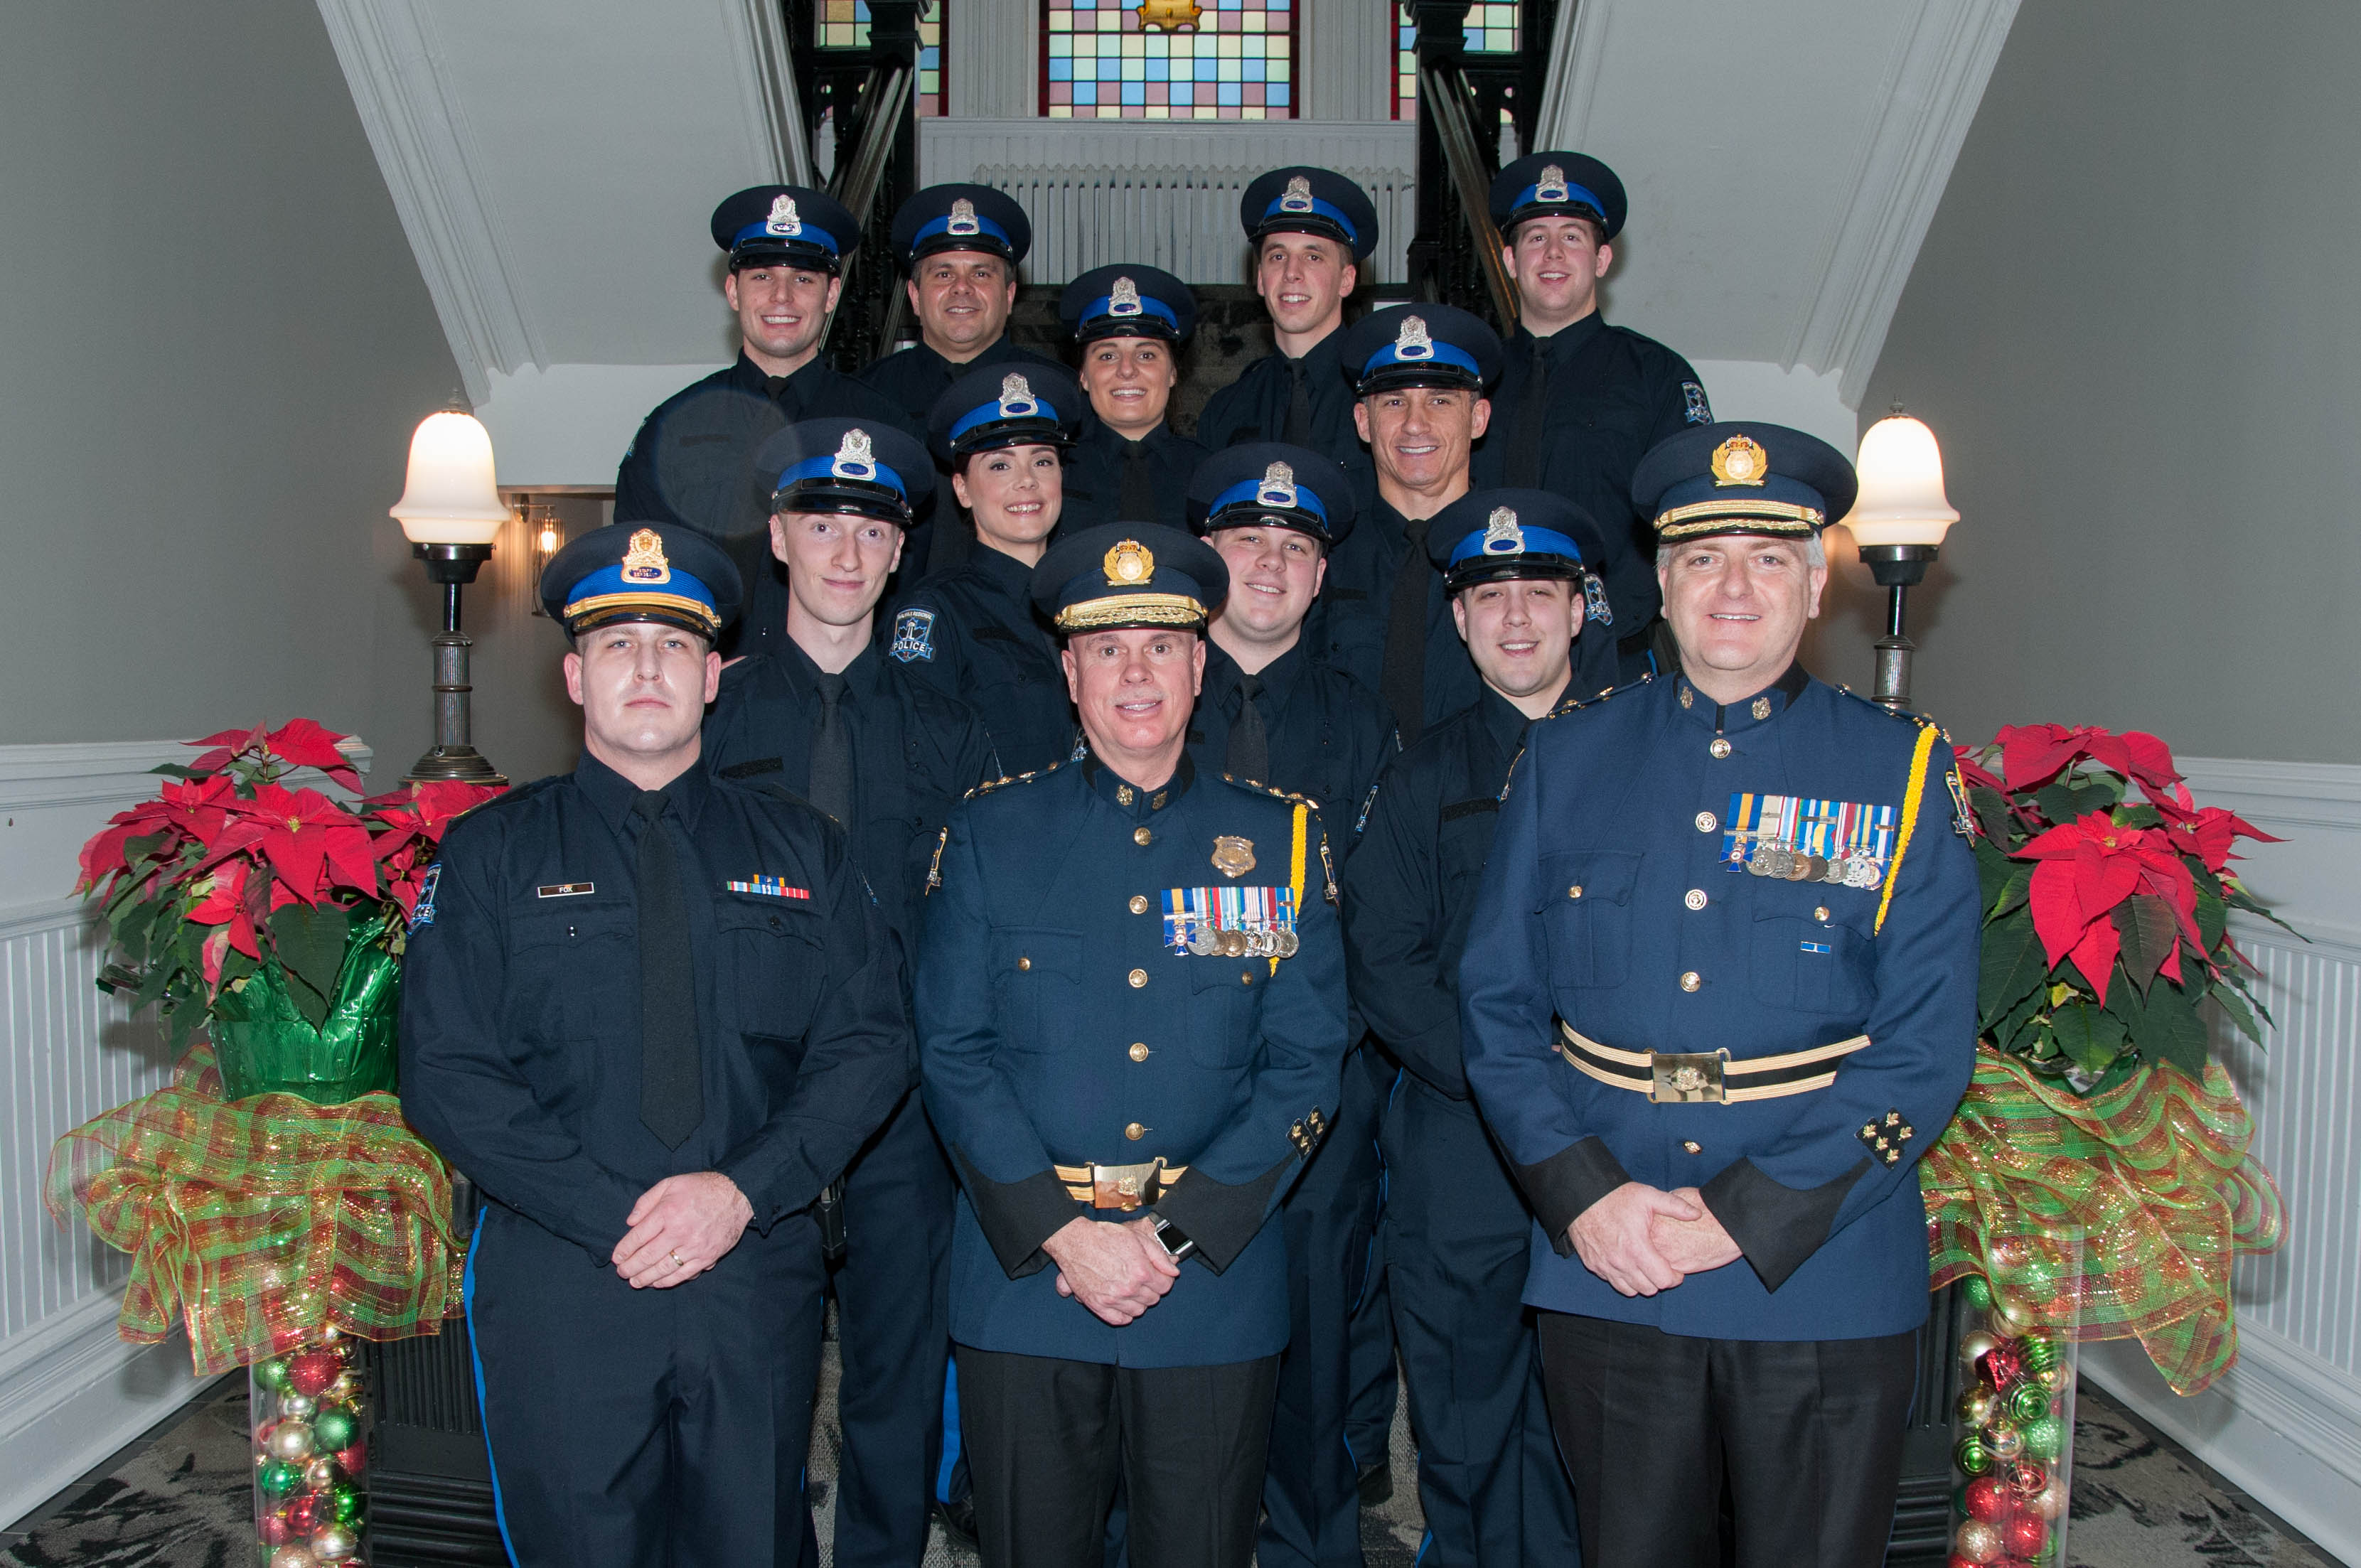 Note: Attached is a picture of our newly-minted officers from this morning's ceremony.